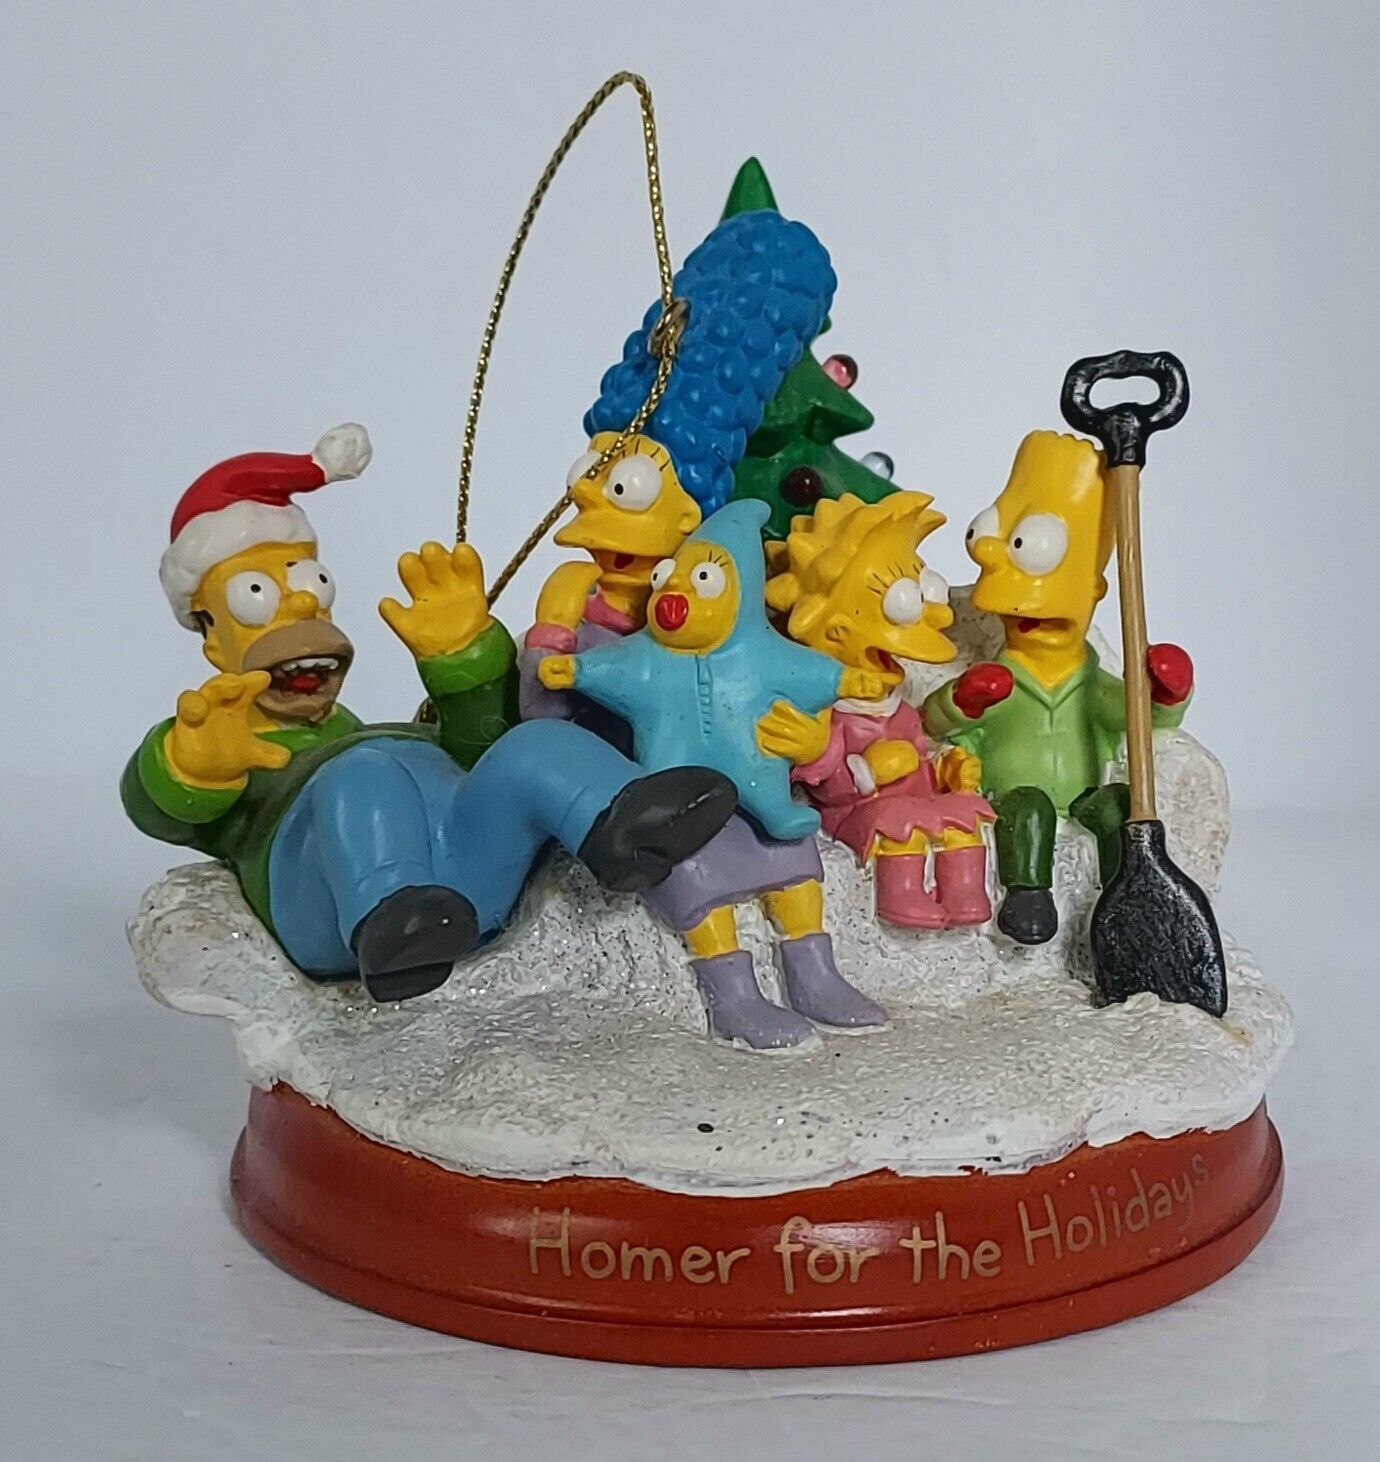 Simpsons Bradford Christmas Ornament Illuminated Titled Homer For The Holidays